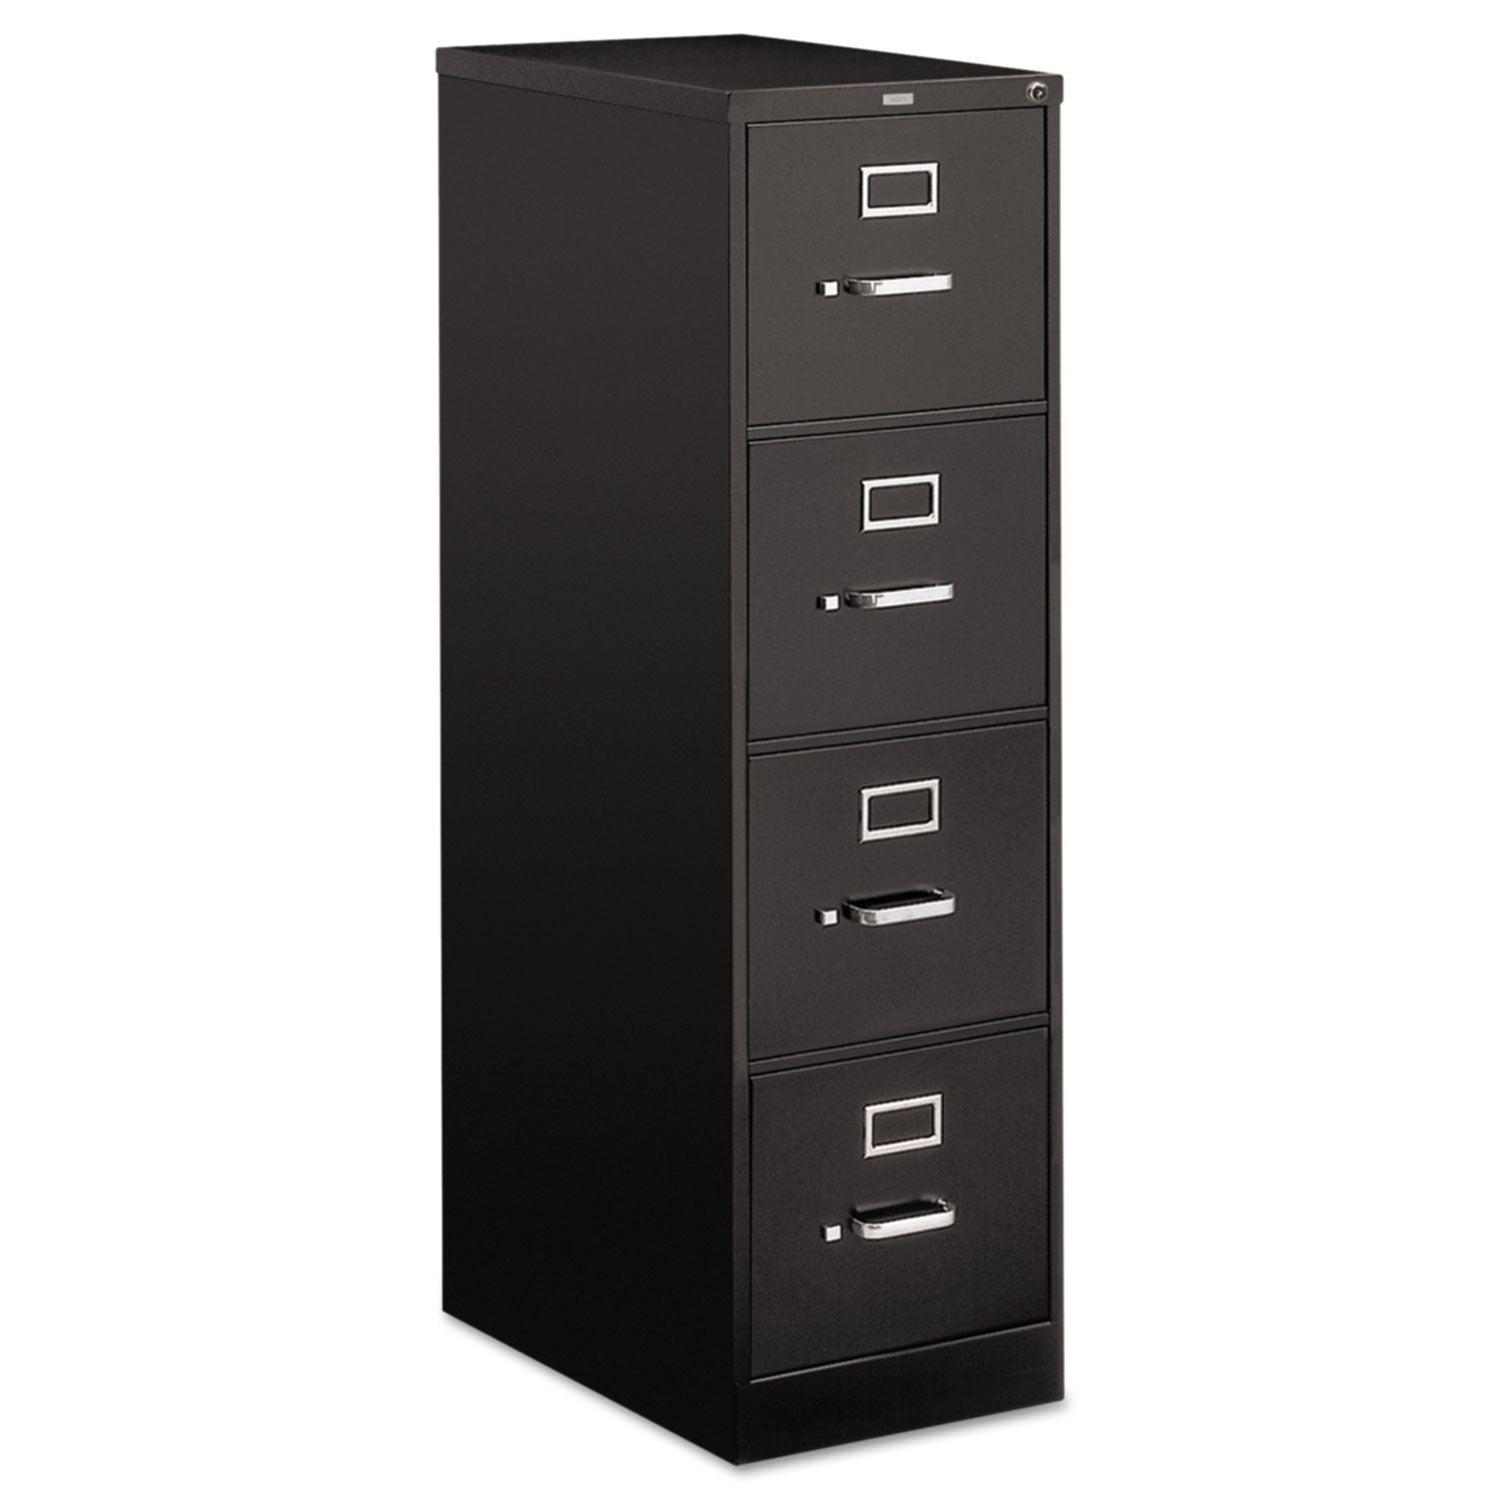 510 Series Vertical File, 4 Letter-Size File Drawers, Black, 15" x 25" x 52 - 